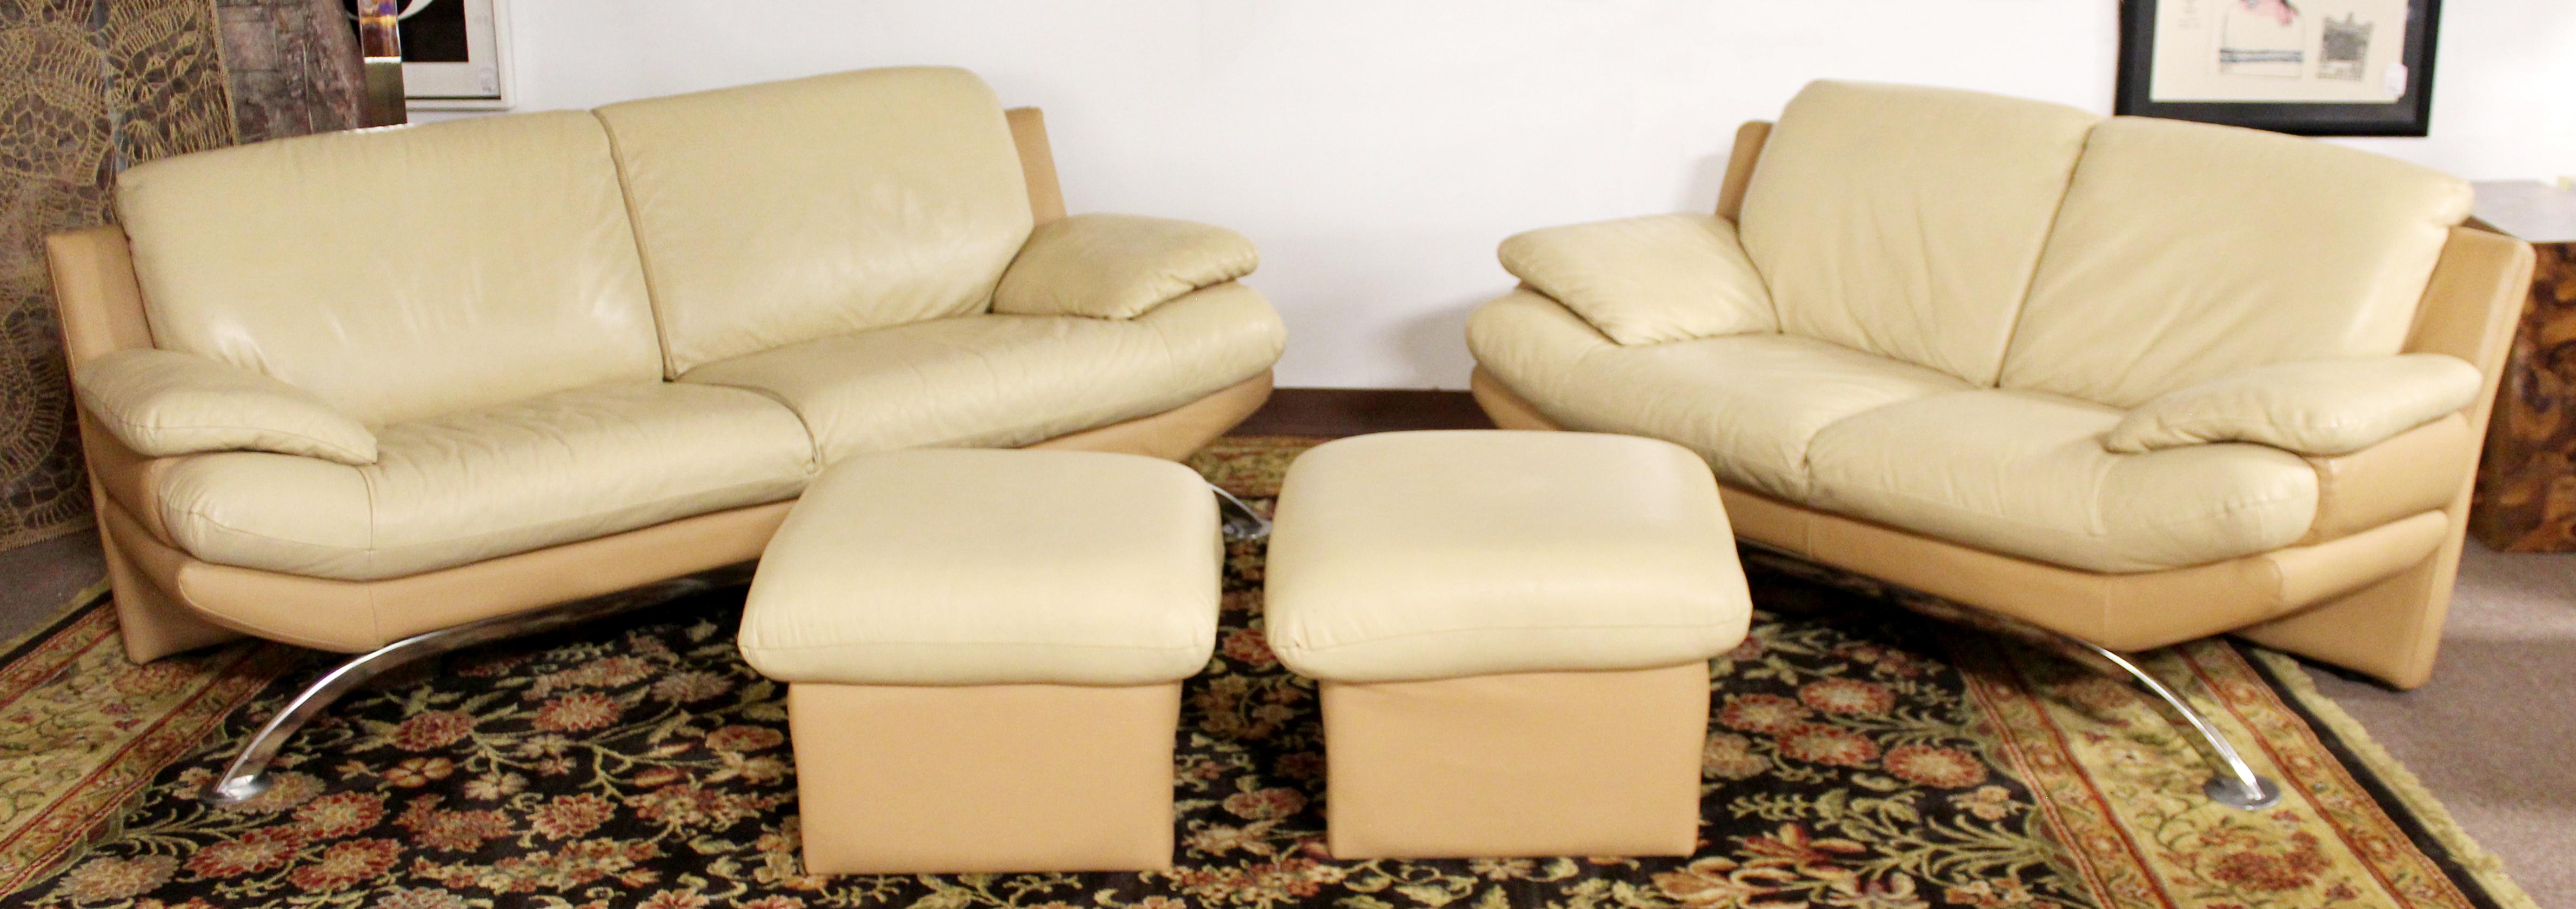 Contemporary Modern Roche Bobois Leather Chrome Sofa & Loveseat Pair Ottoman Set In Good Condition In Keego Harbor, MI